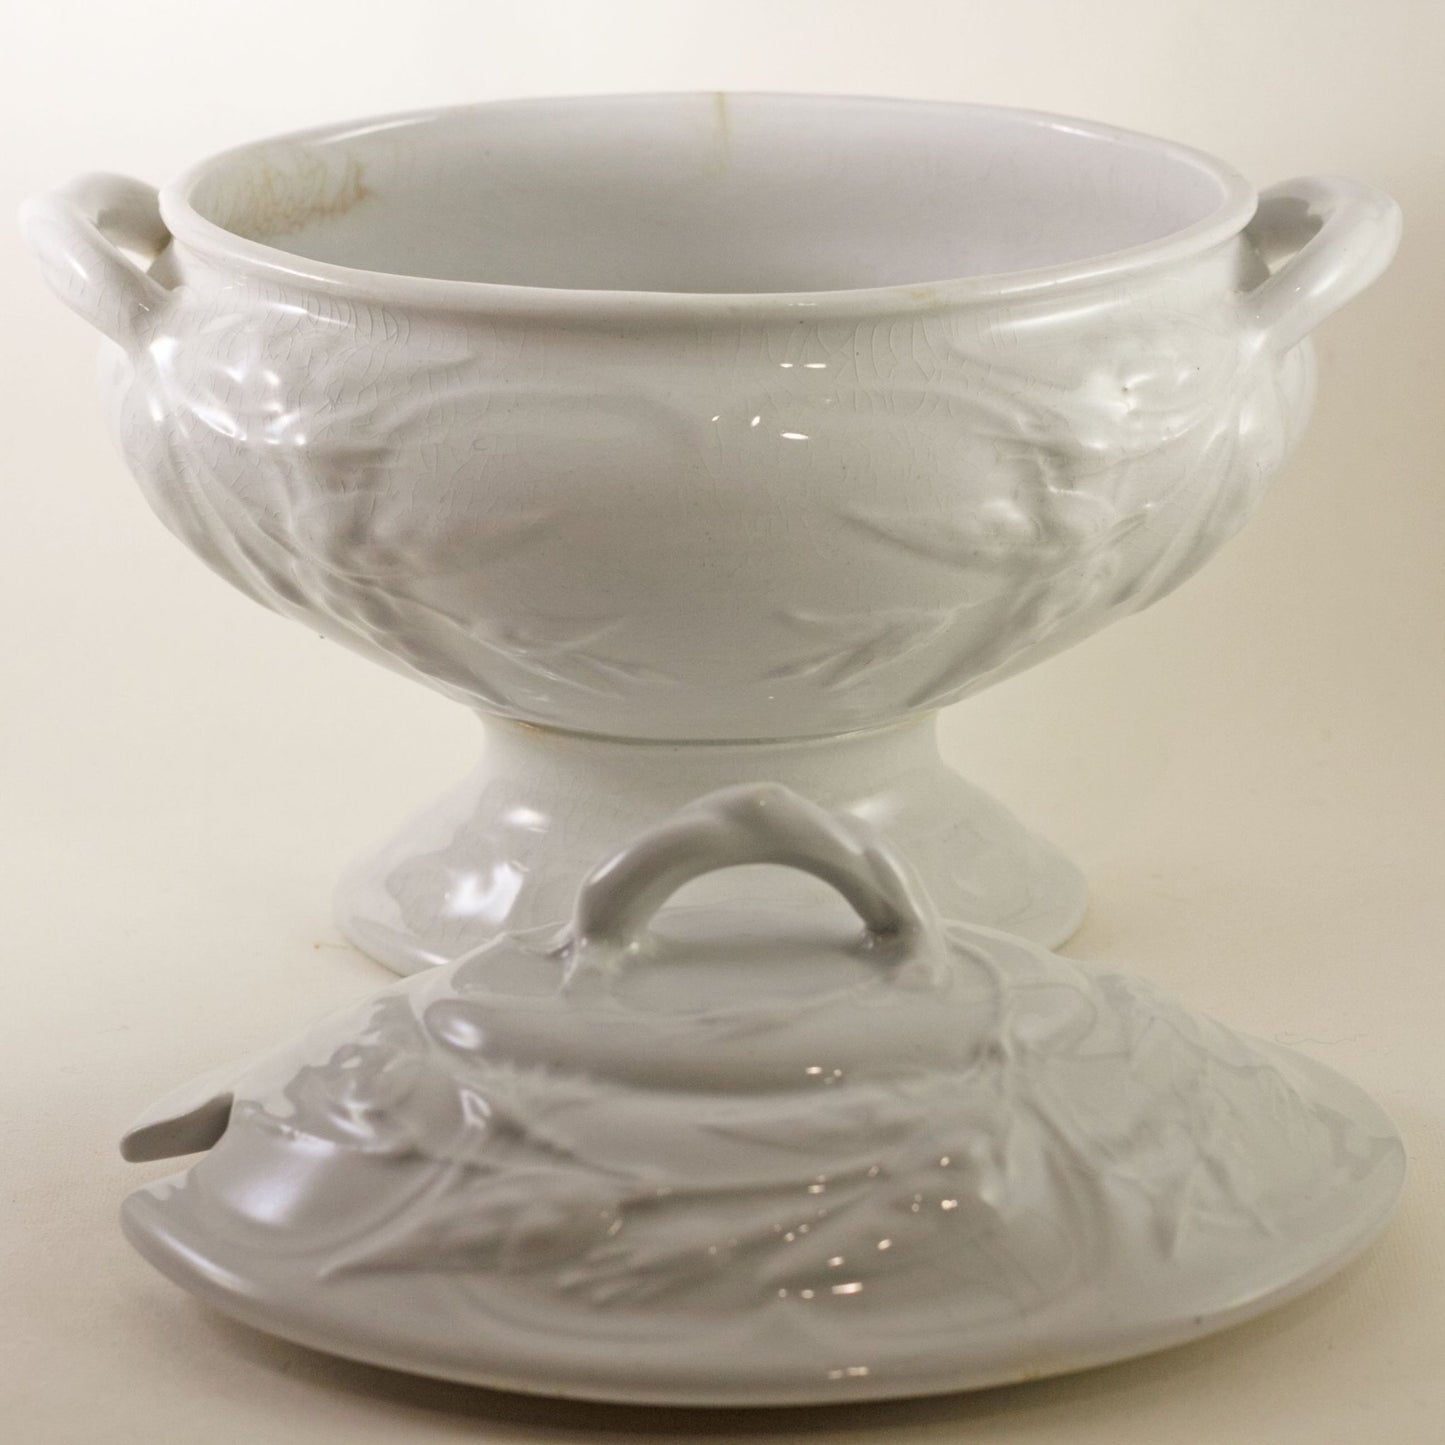 MINIATURE WHITE IRONSTONE Footed Covered Soup Tureen Imported by A De Forest of Ann Arbor Circa 19th Century